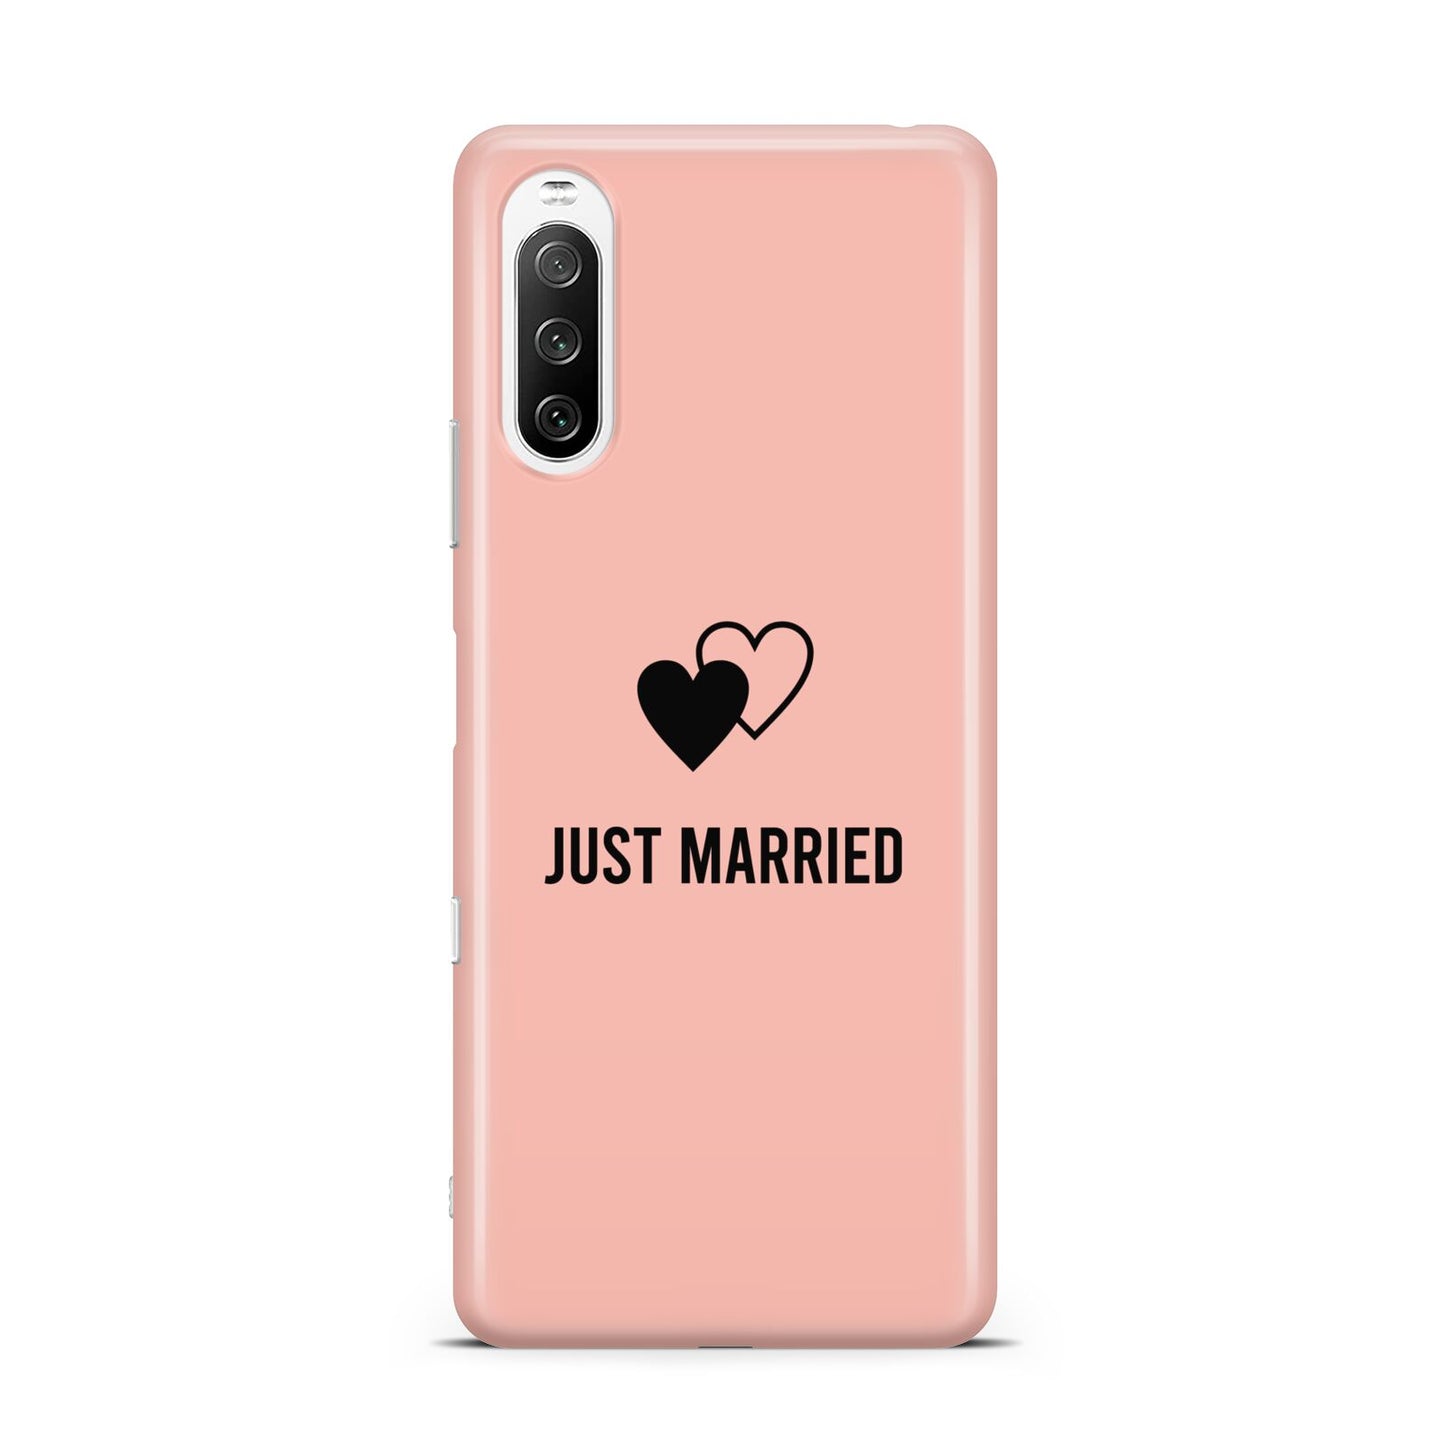 Just Married Sony Xperia 10 III Case